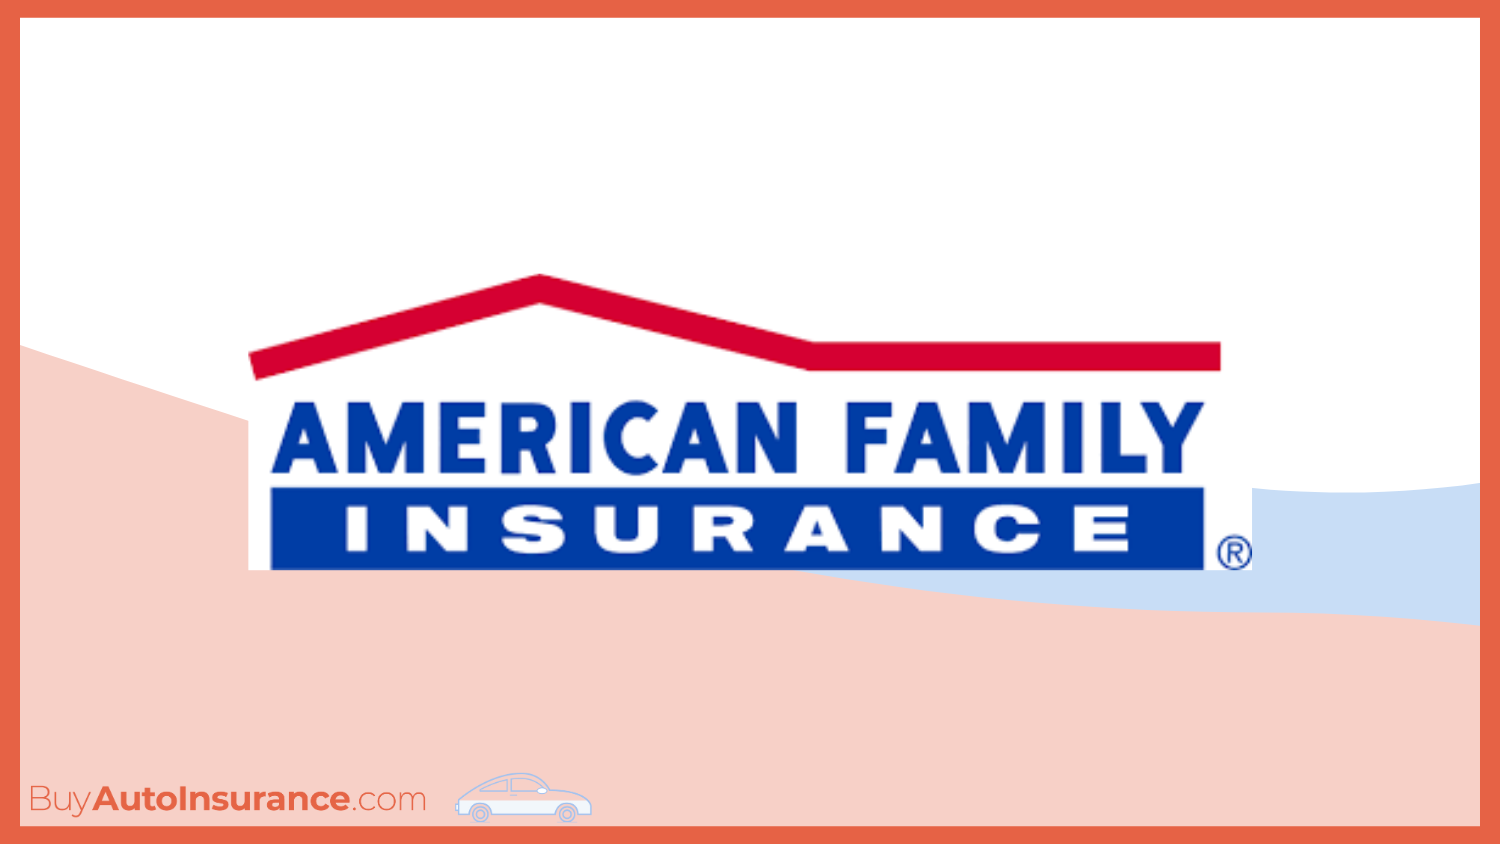 American Family: Cheap Auto Insurance for Foreigners